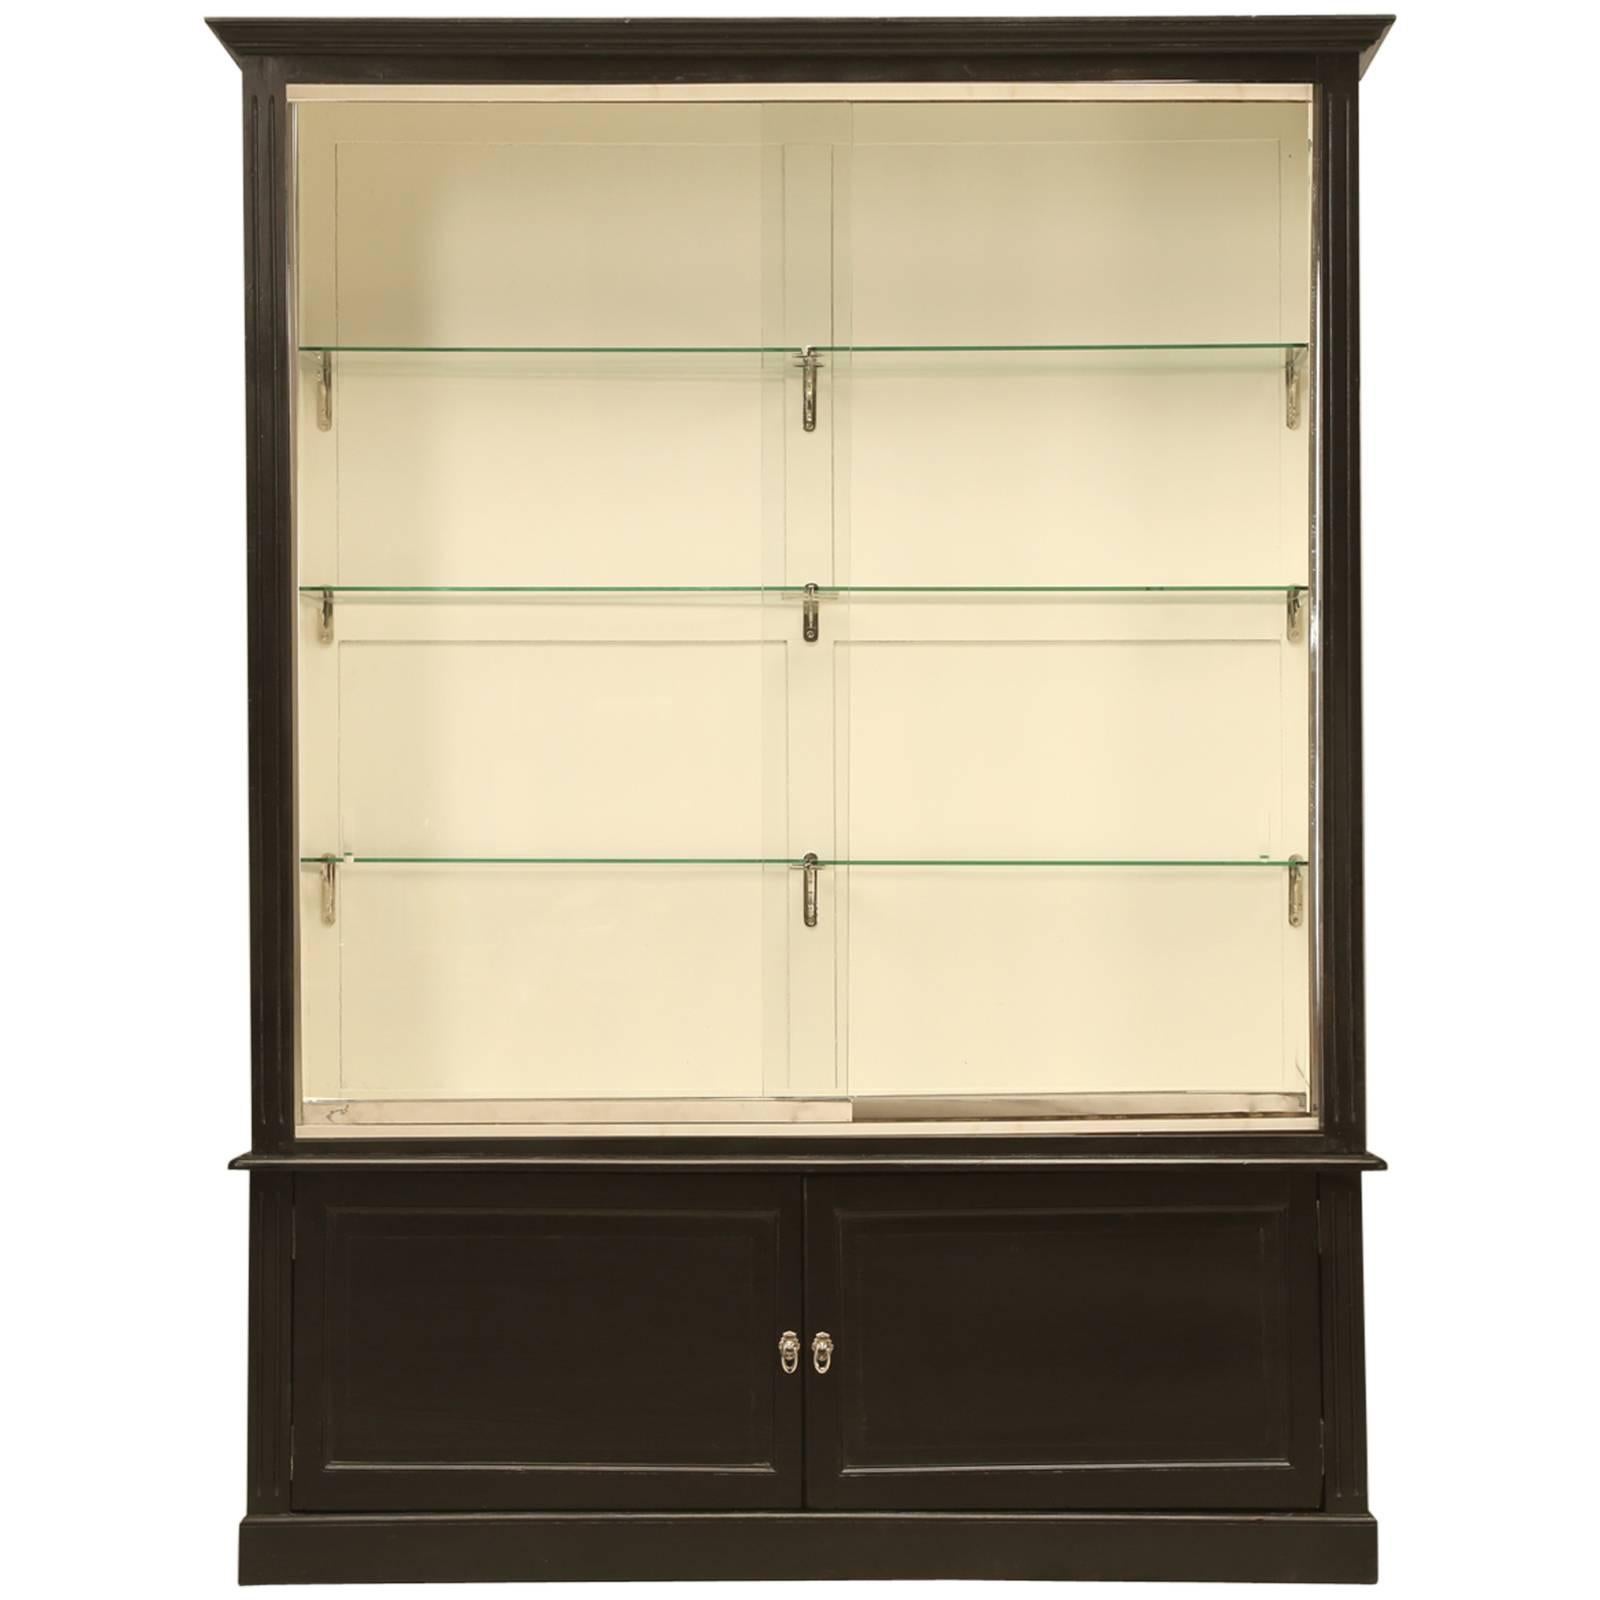 French Display Cabinet or Store Fitting Restored 